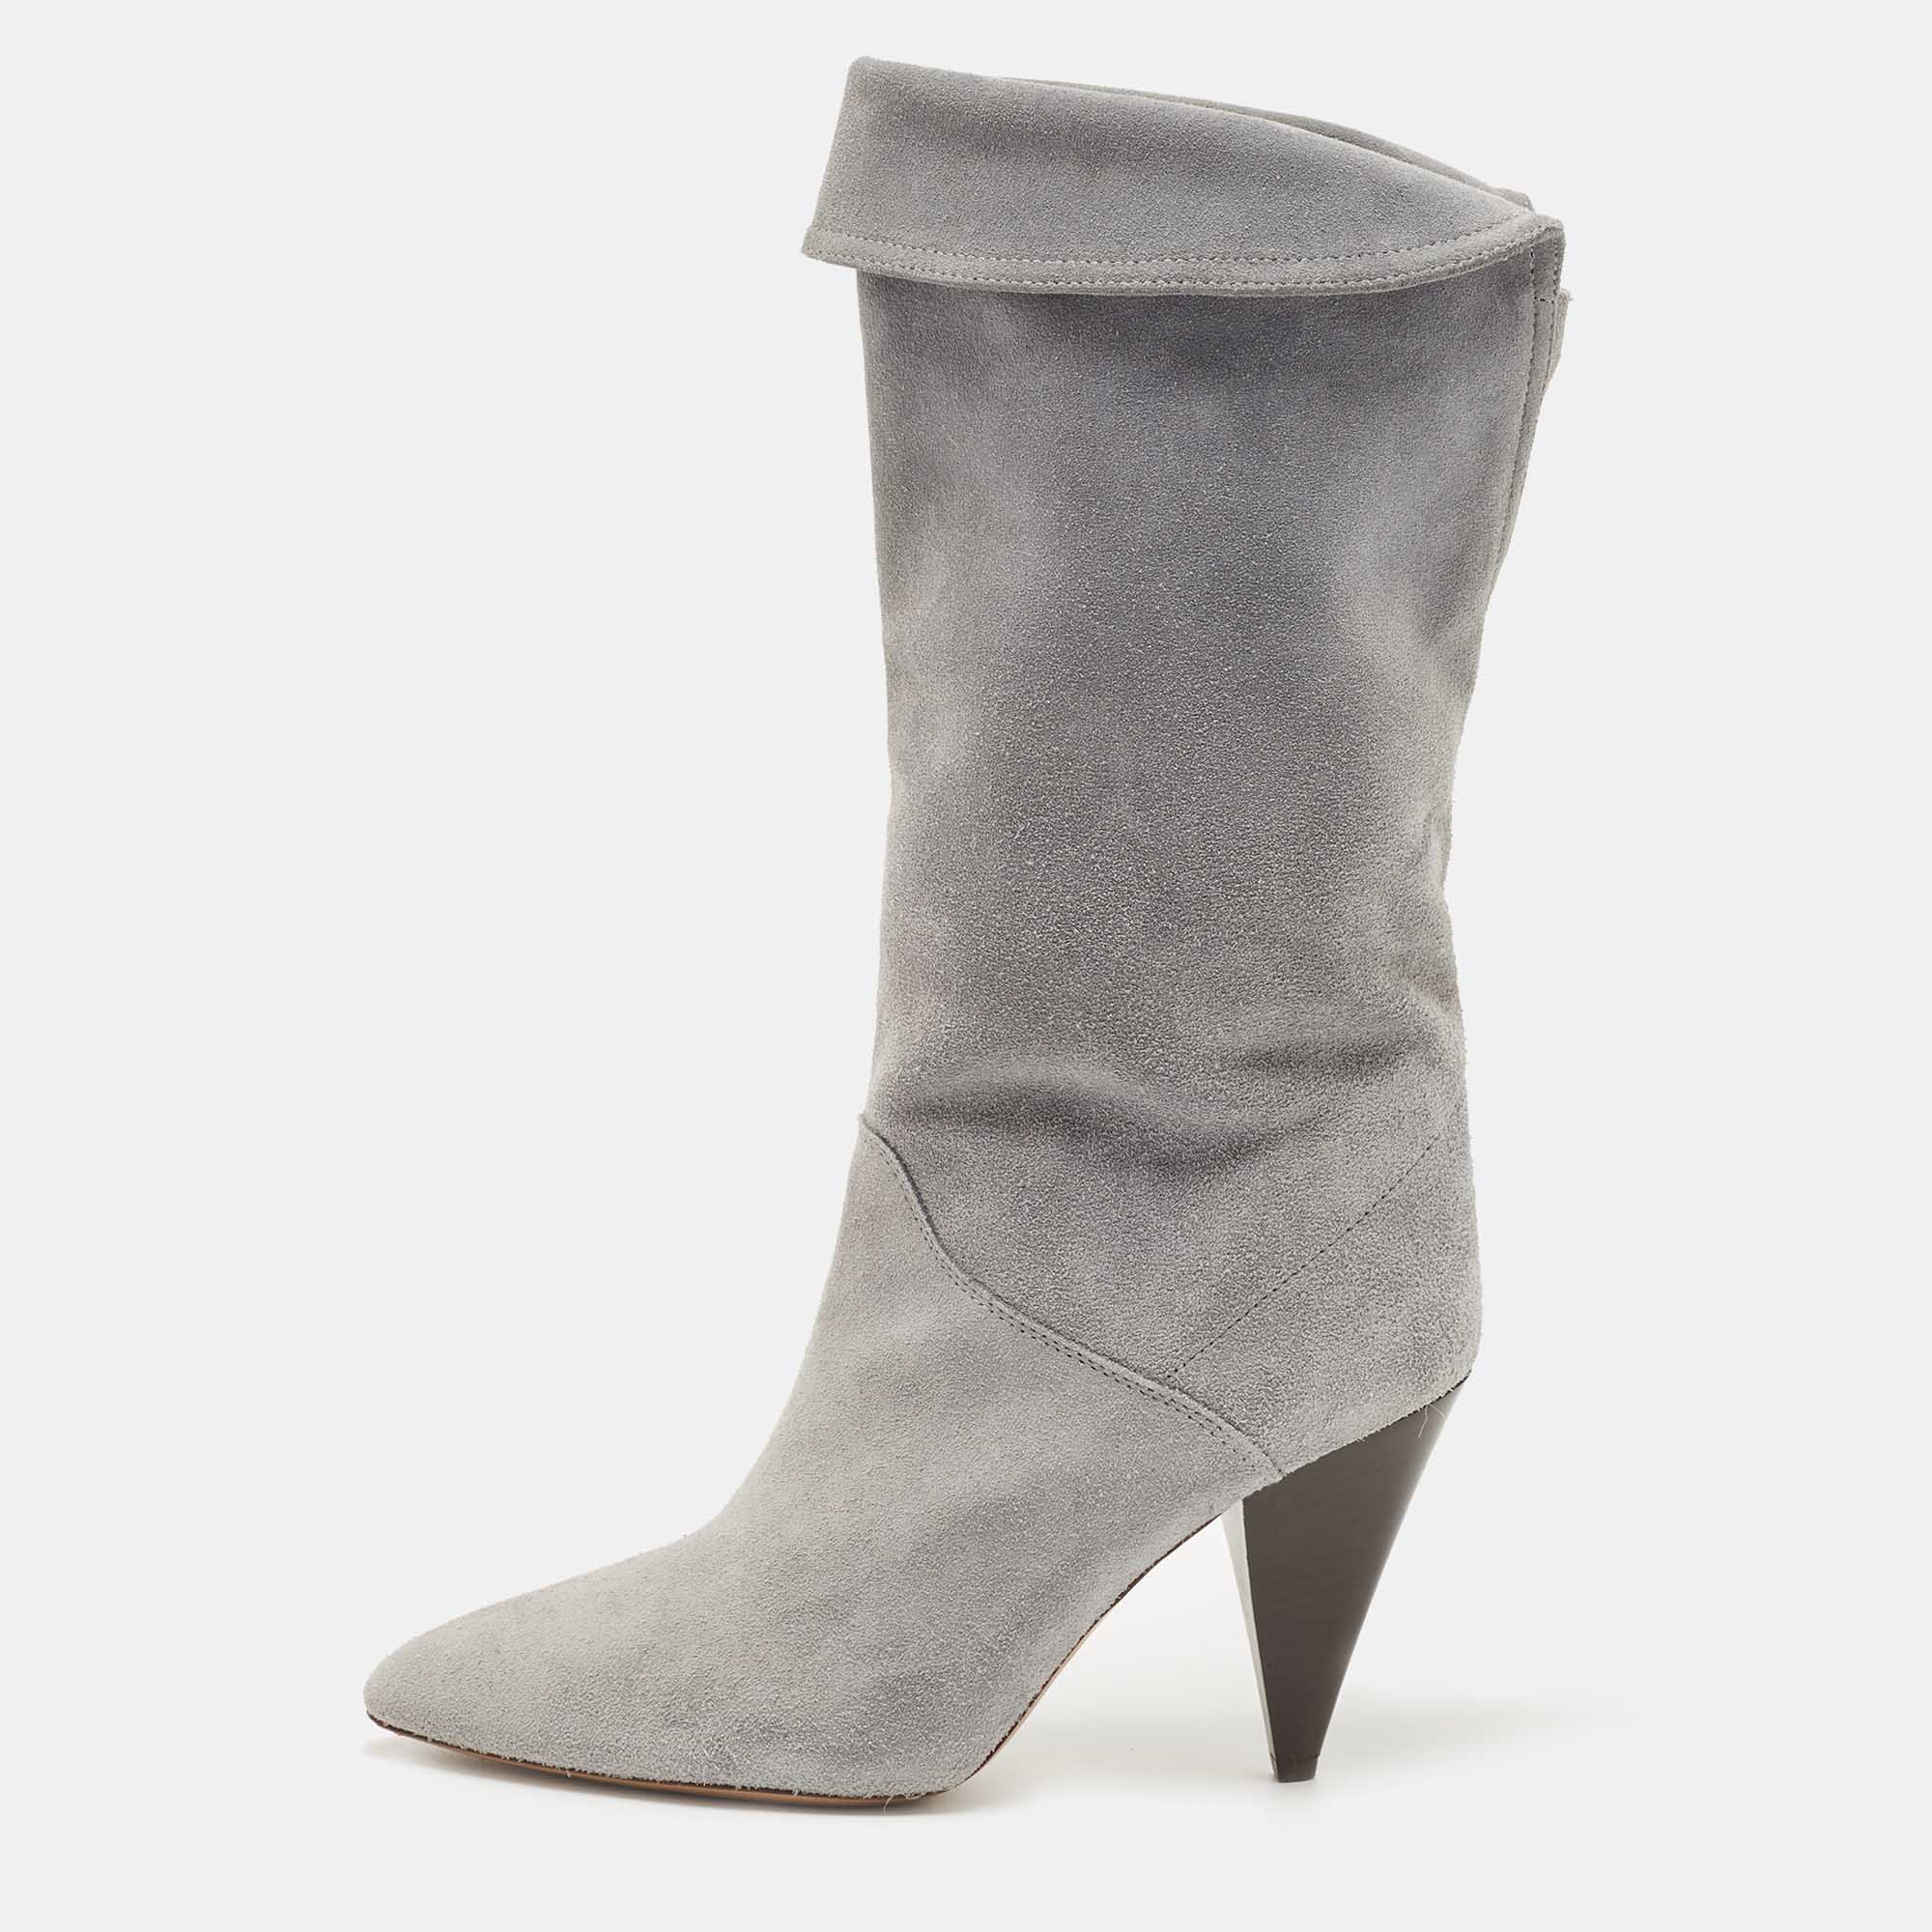 Isabel Marant Blue Suede Midcalf Boots Size 38